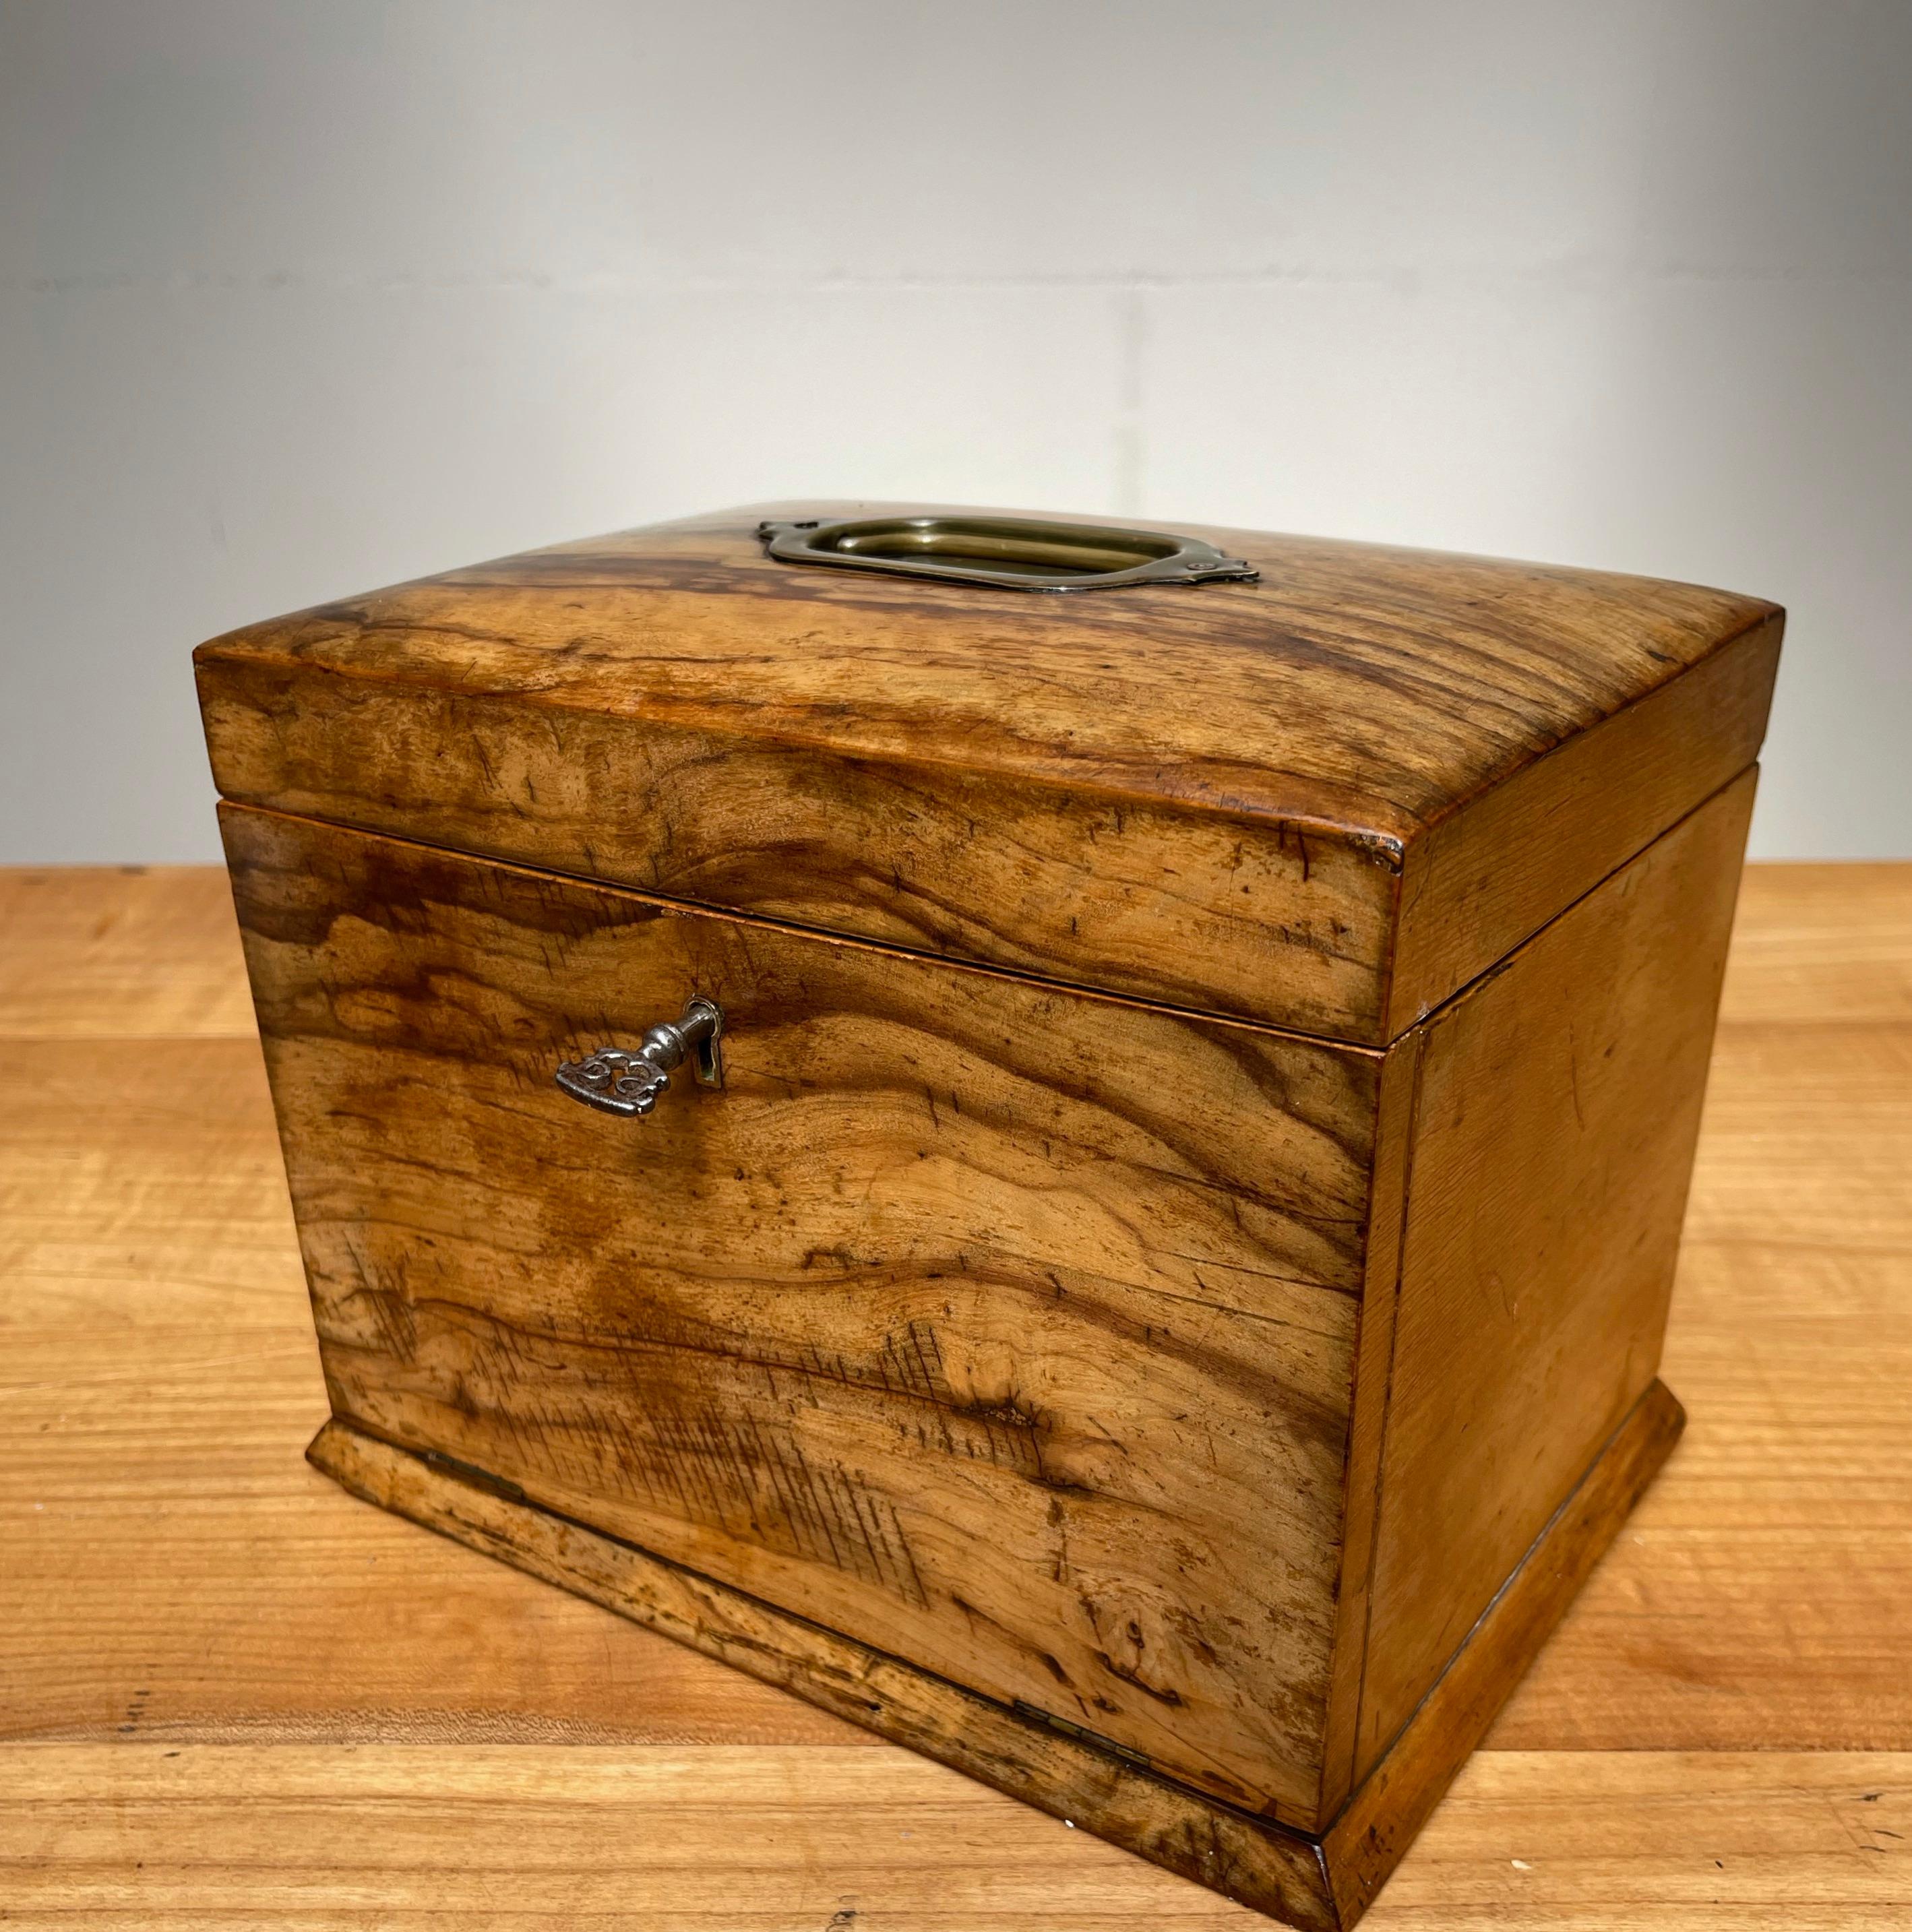 A beautiful antique and all handcrafted jewelry box with a fine and padded interior.

This rare and practical size jewelry box makes a beautiful accessory for a lady with an eye for fine arts. It is a very well made gem and highly practical with two